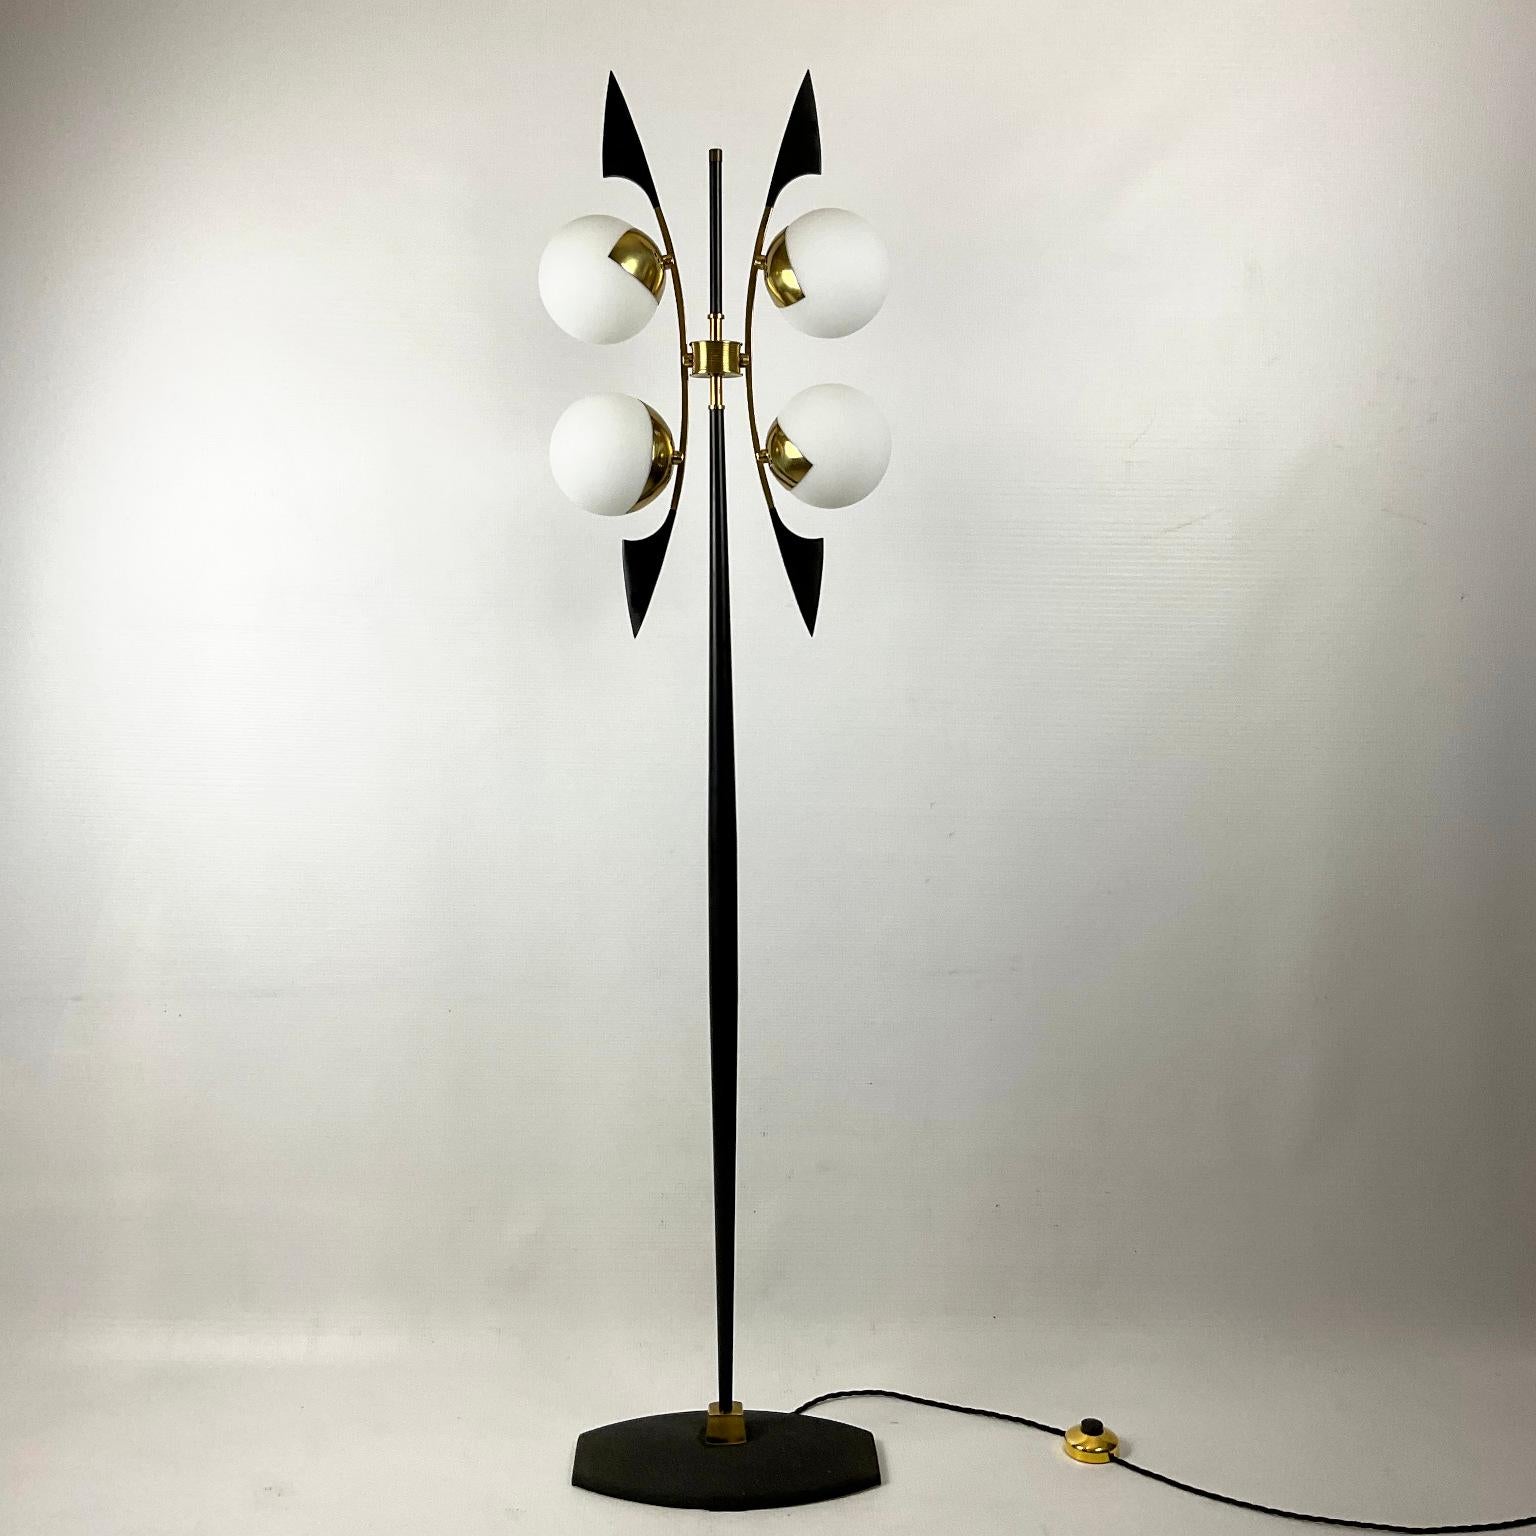 Rare quality floor lamp edited by Maison Arlus France 1950s.
On each side of the base, the shape of two brass bows with a plastic saber finish.
Includes four opaline globes on brass-finished clips.
Completely rewired with new vintage insulated